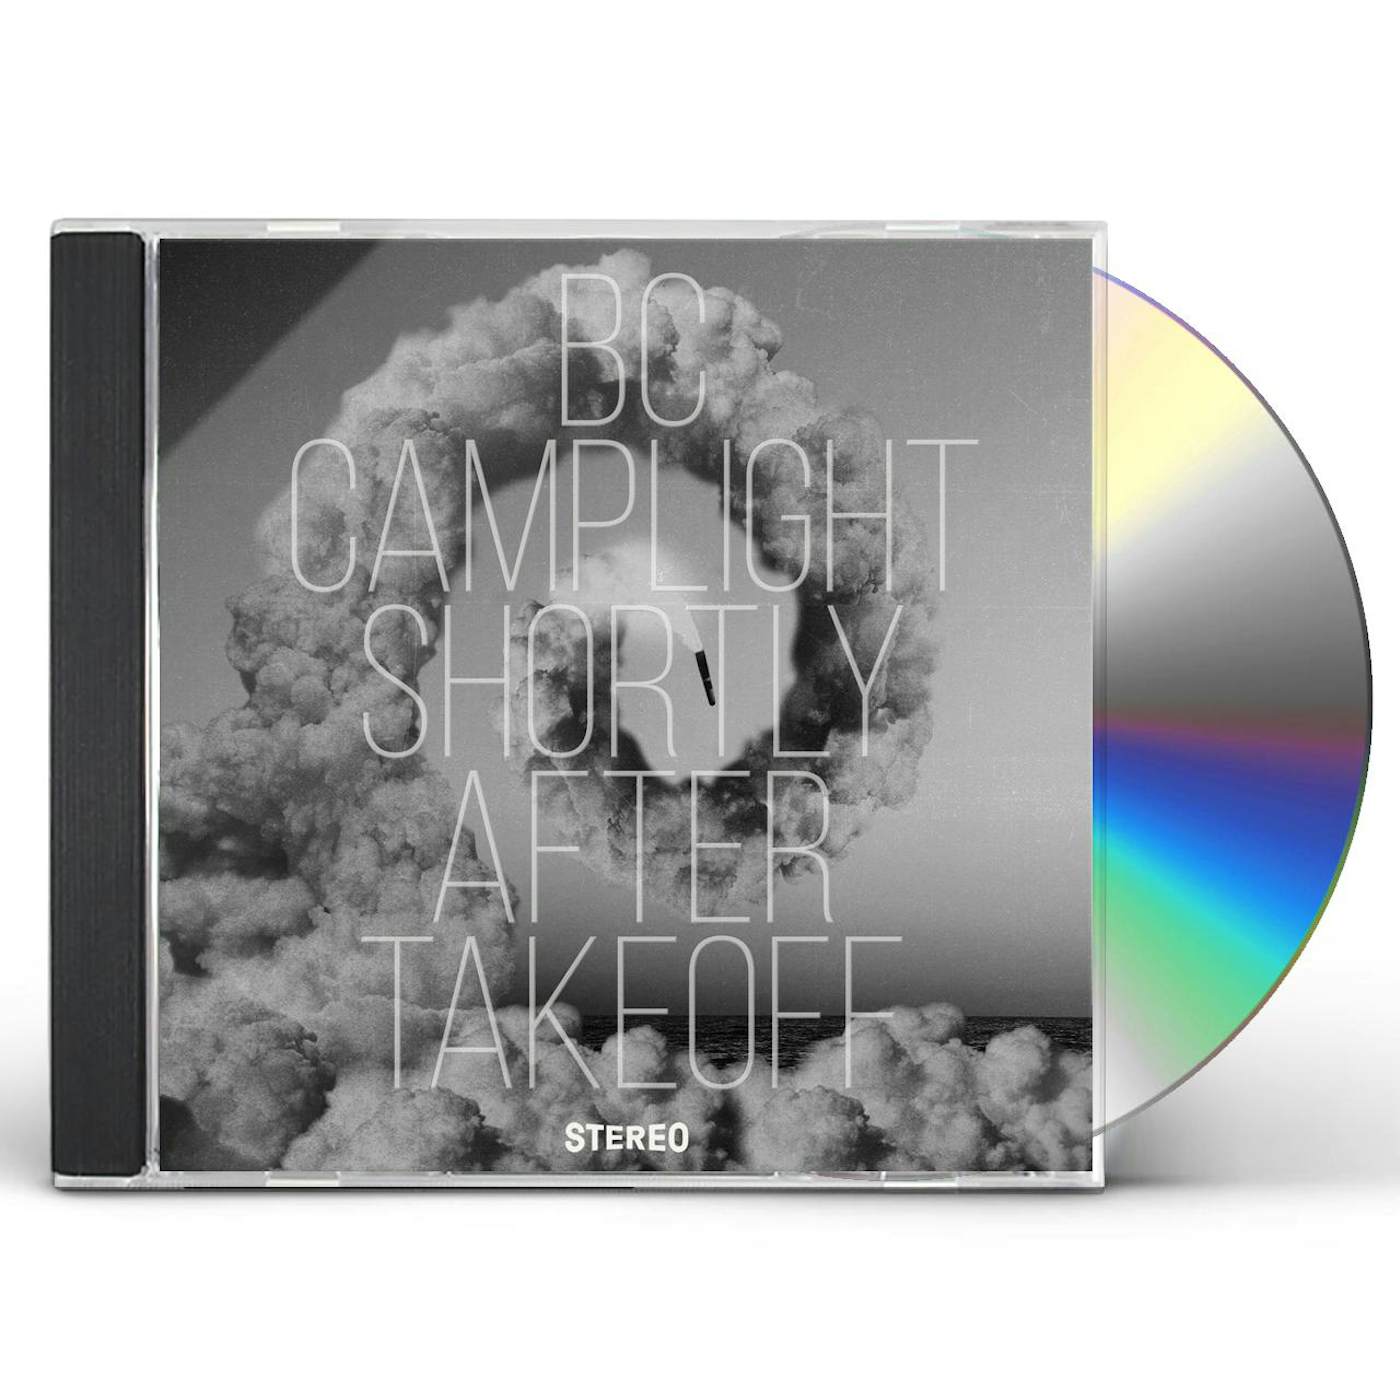 BC Camplight Shortly After Takeoff CD